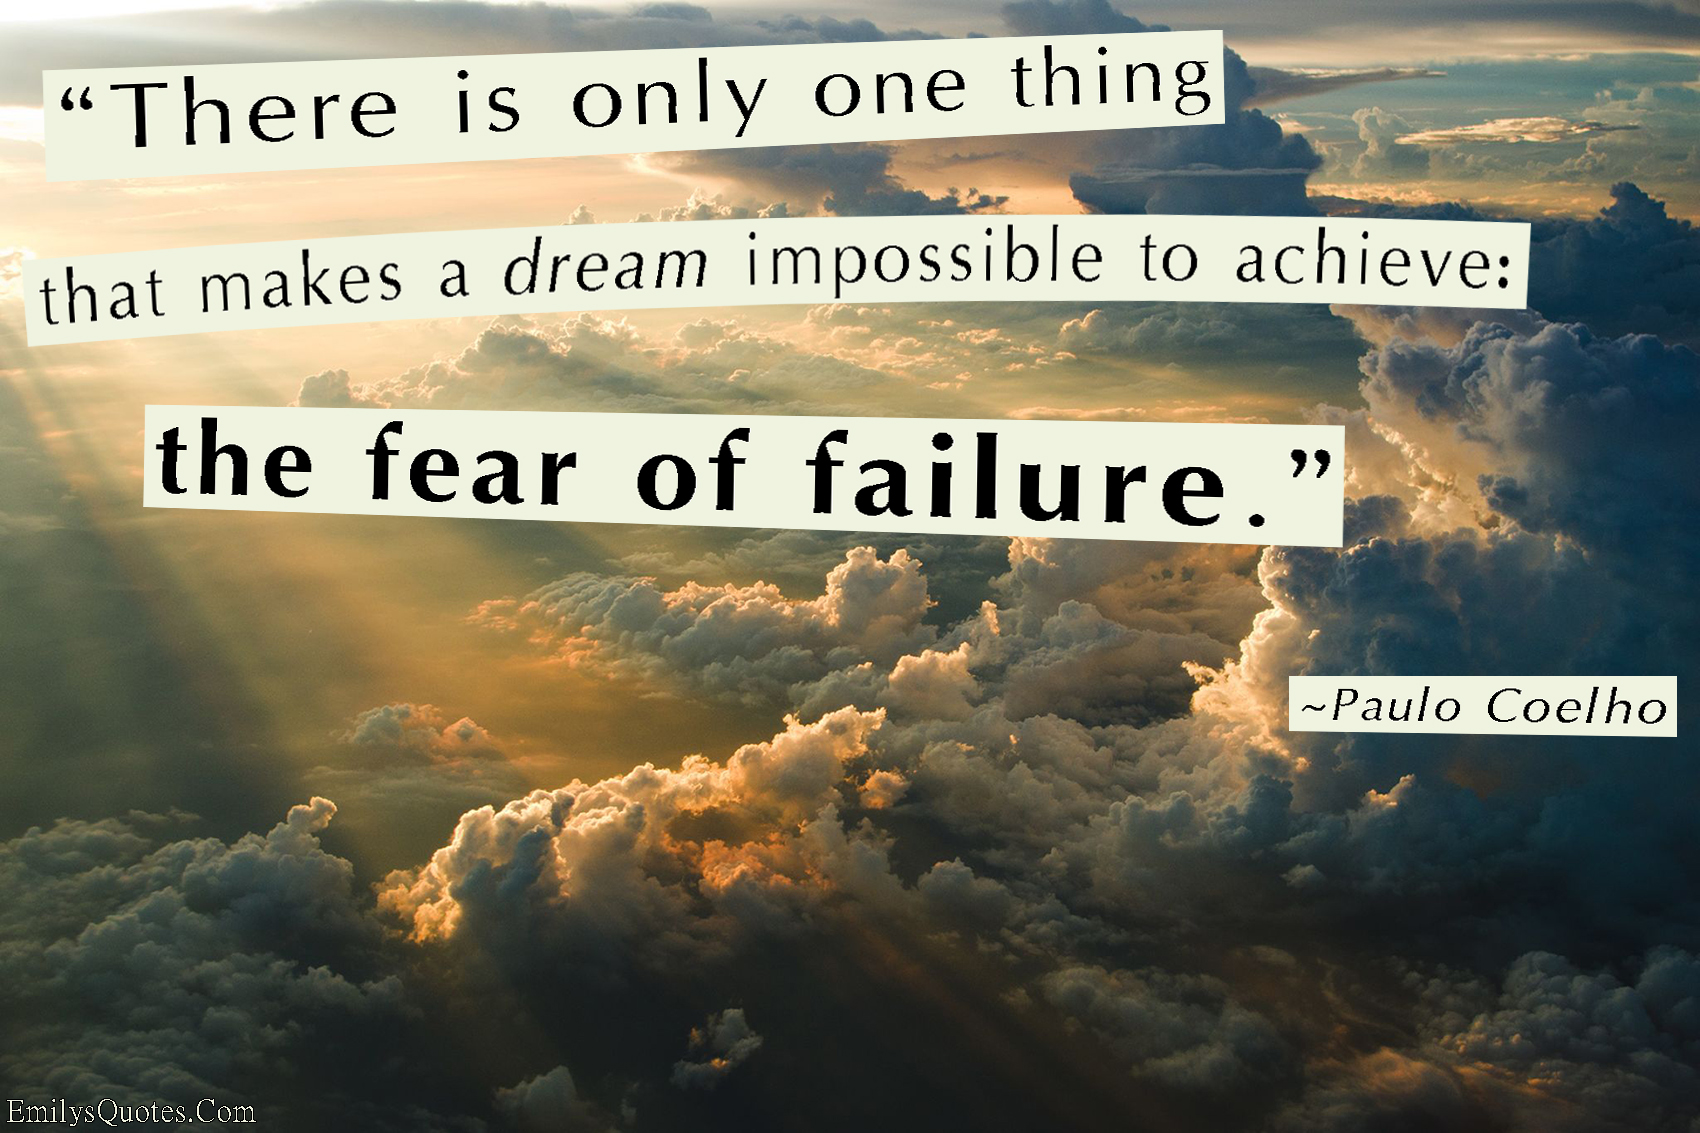 There is only one thing that makes a dream impossible to achieve the fear of failure (8)